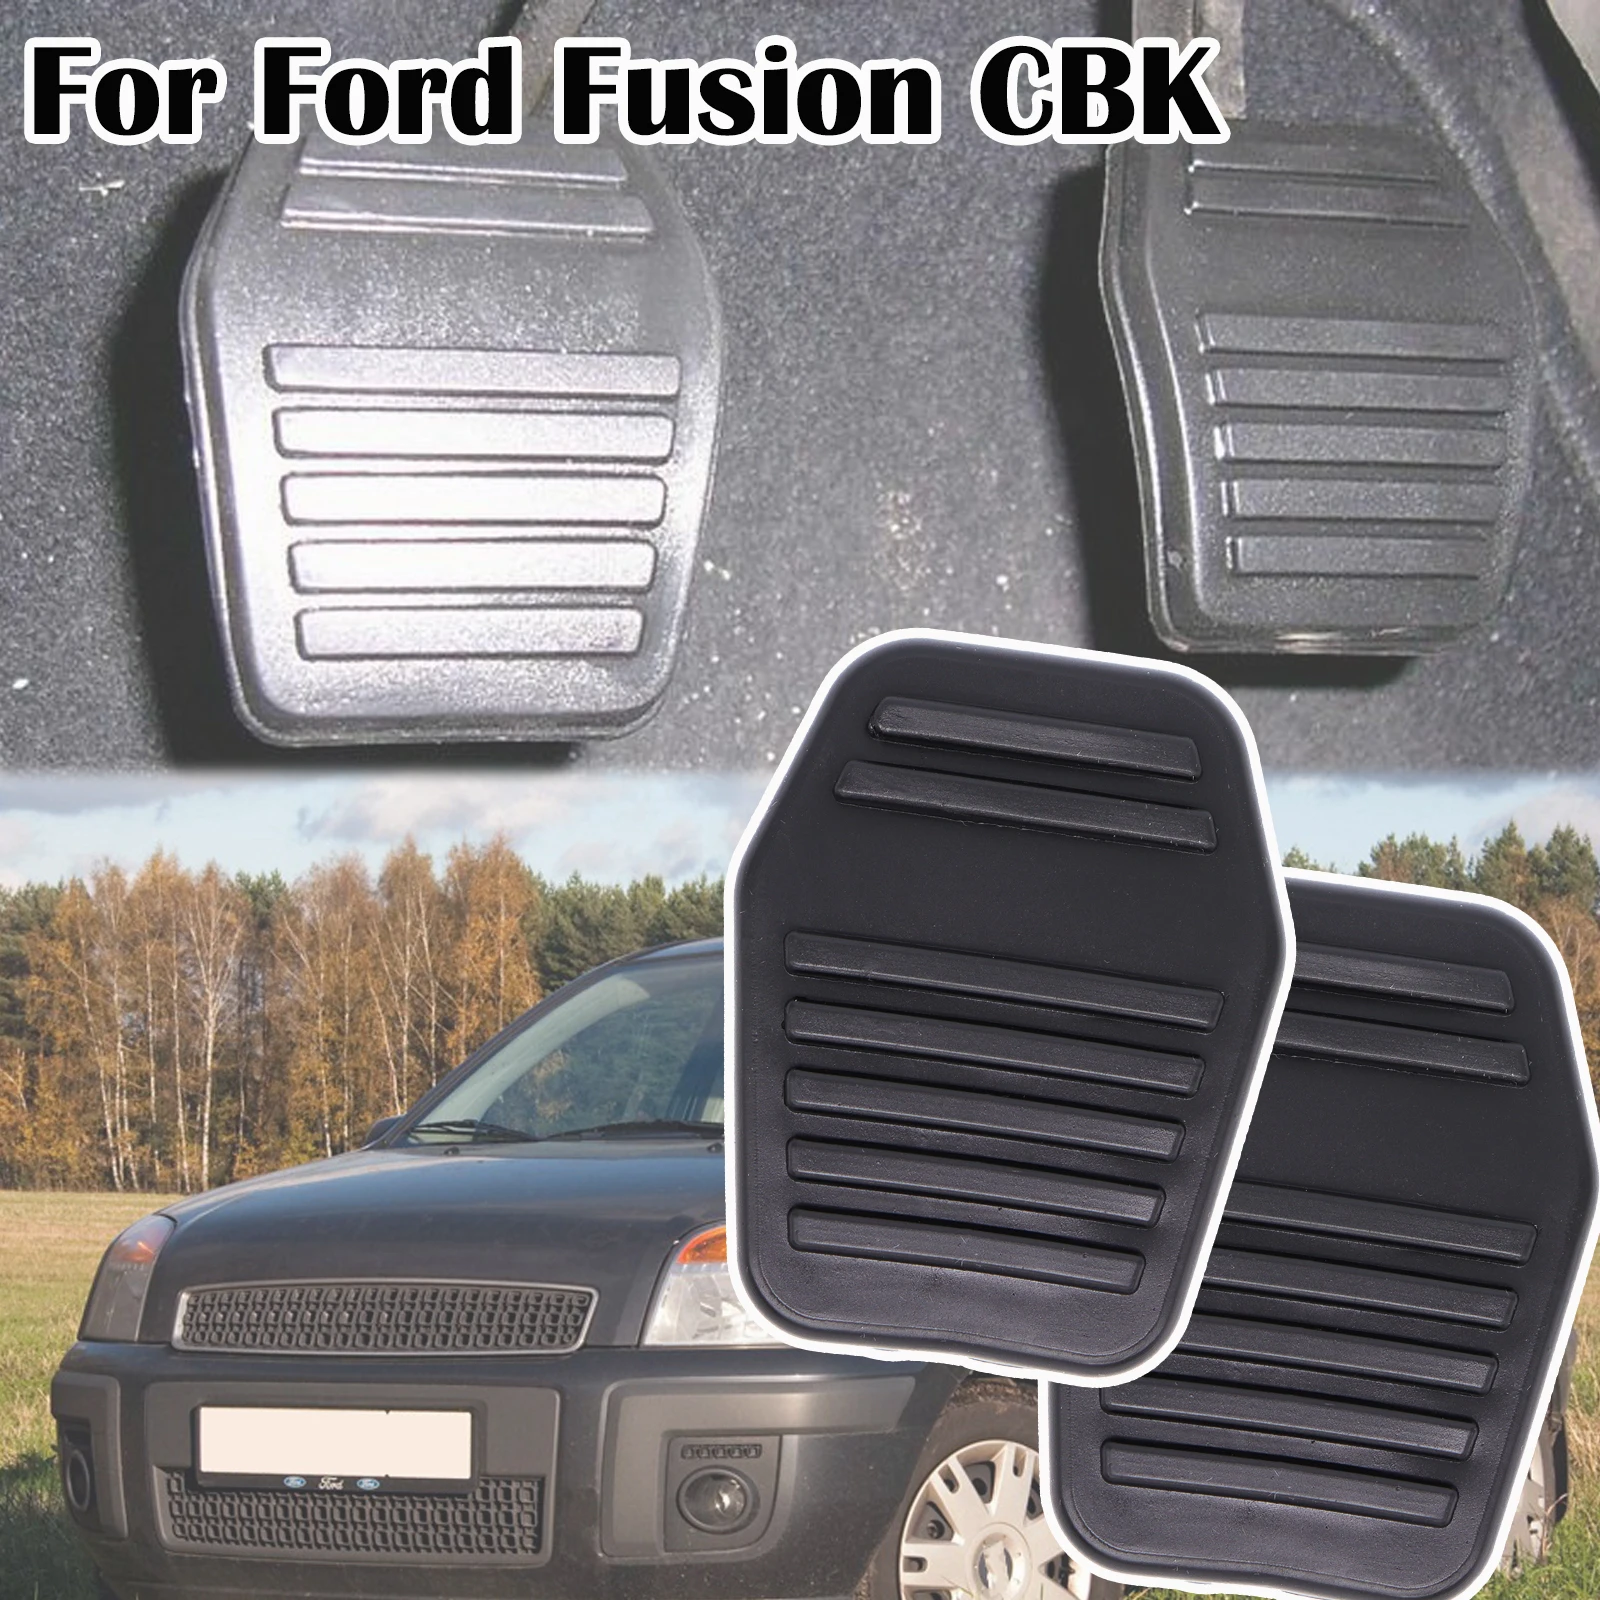 

For Ford Fusion CBK JU 2001 2002 2003 2004 2005 -2012 Mondeo 3 MK3 1993 - 2007 Car Brake Clutch Foot Pedal Pad Cover Accessories